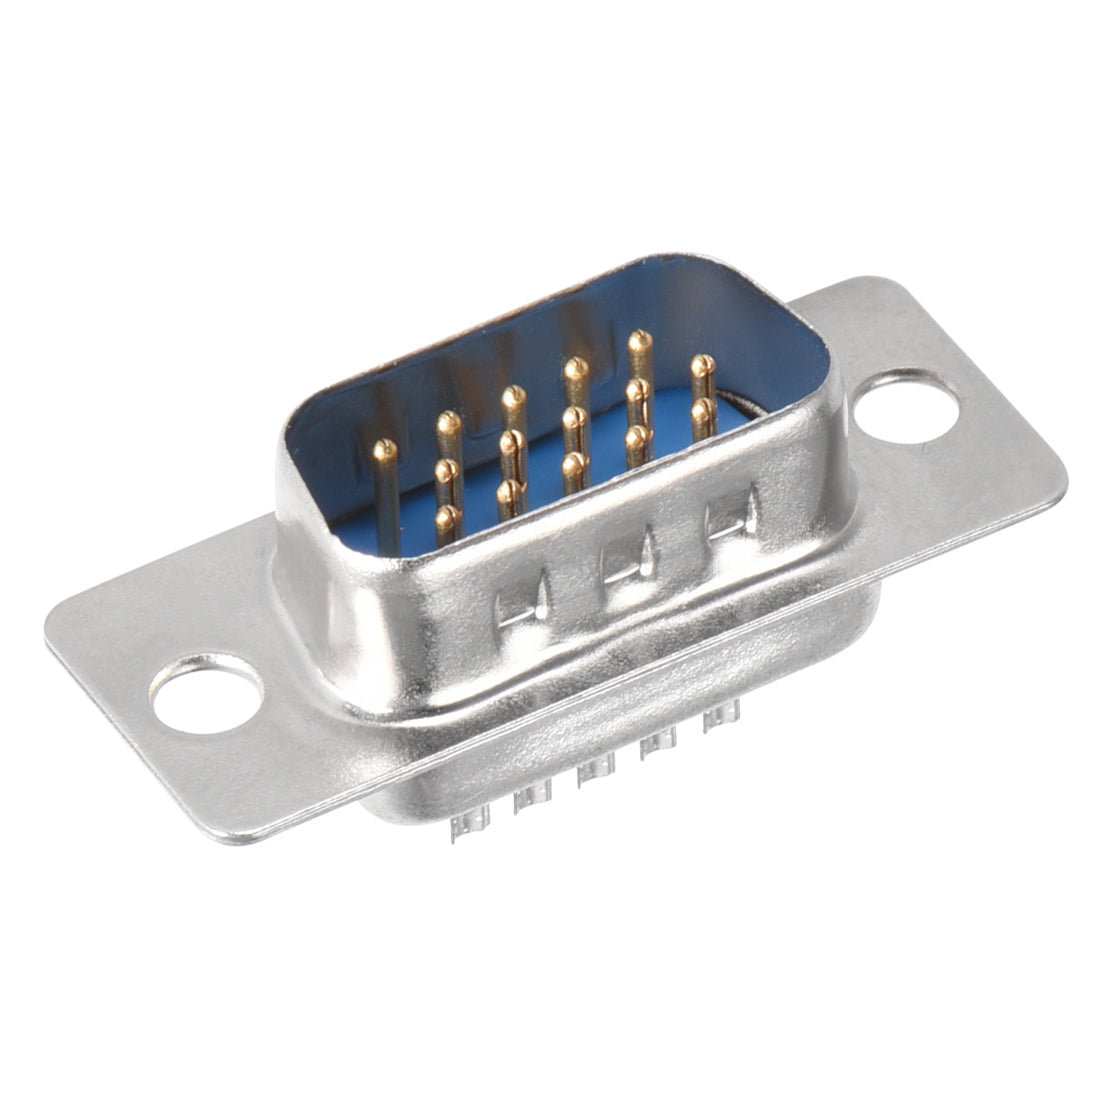 uxcell Uxcell D-sub Connector Male Plug 15-pin 3-row Port Terminal Breakout Solder Type for Mechanical Equipment CNC Computers Blue 1pc